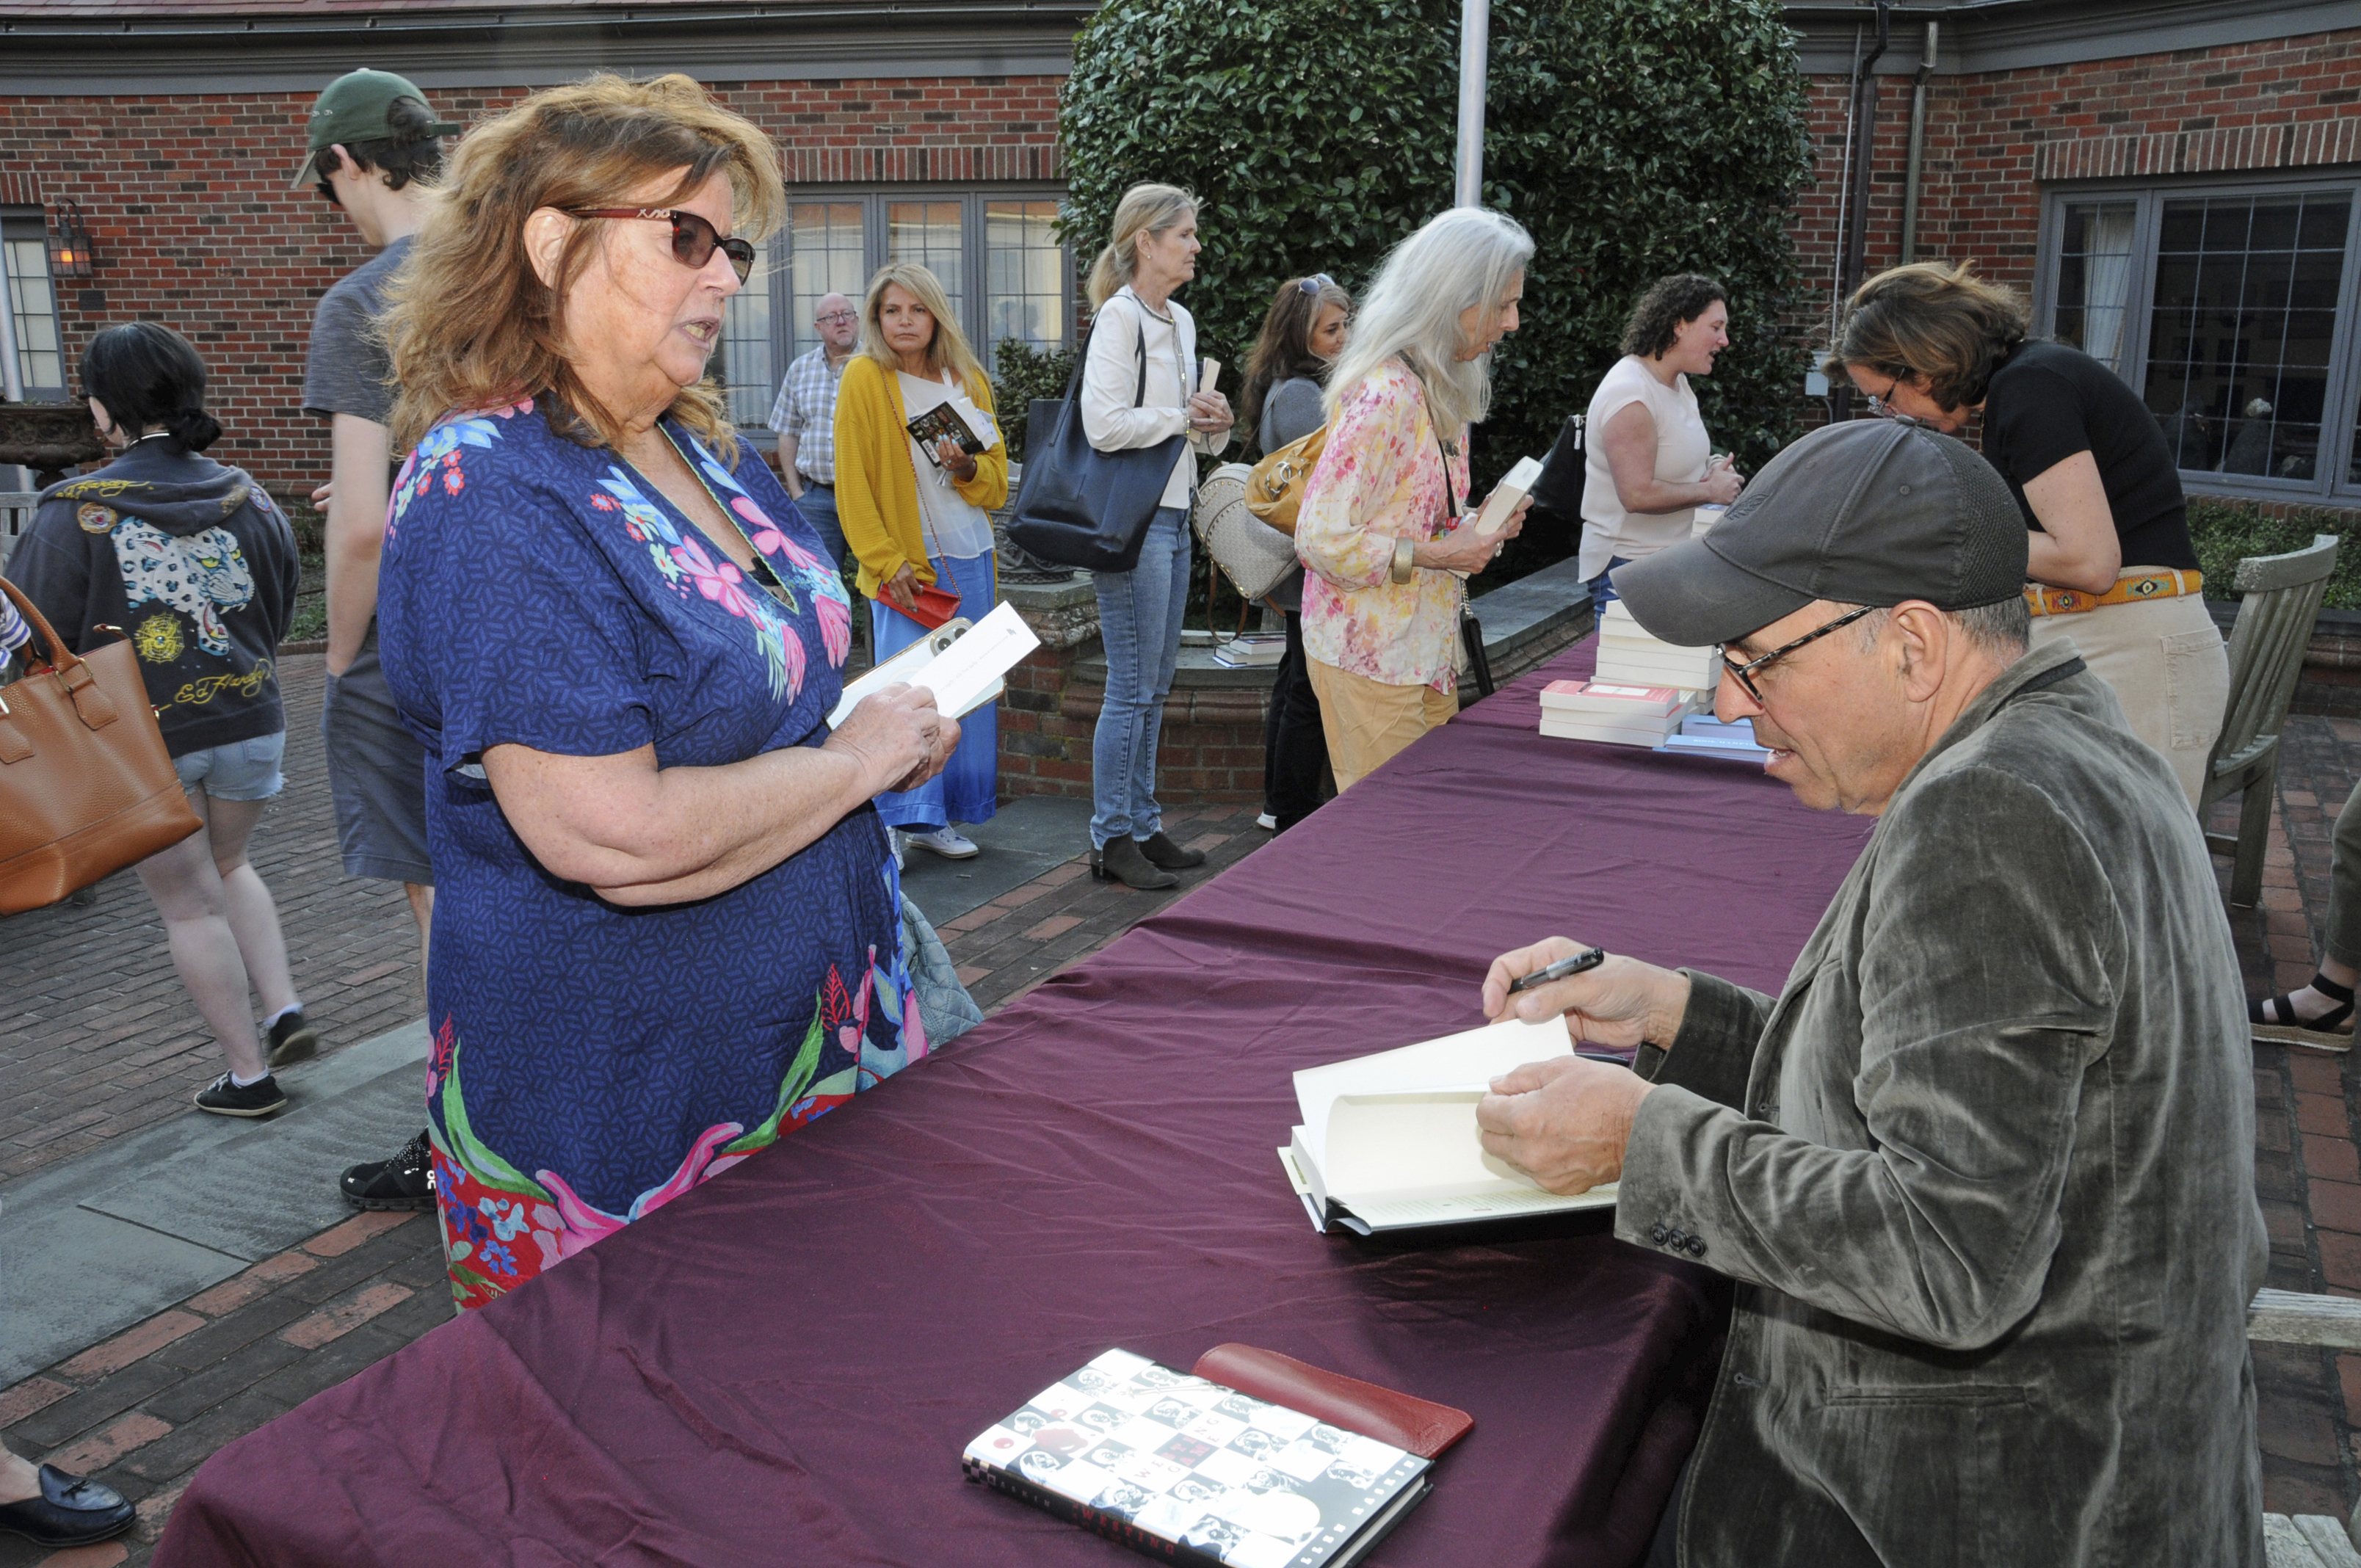 Author Anthony Horowitz signs a book for a fan.